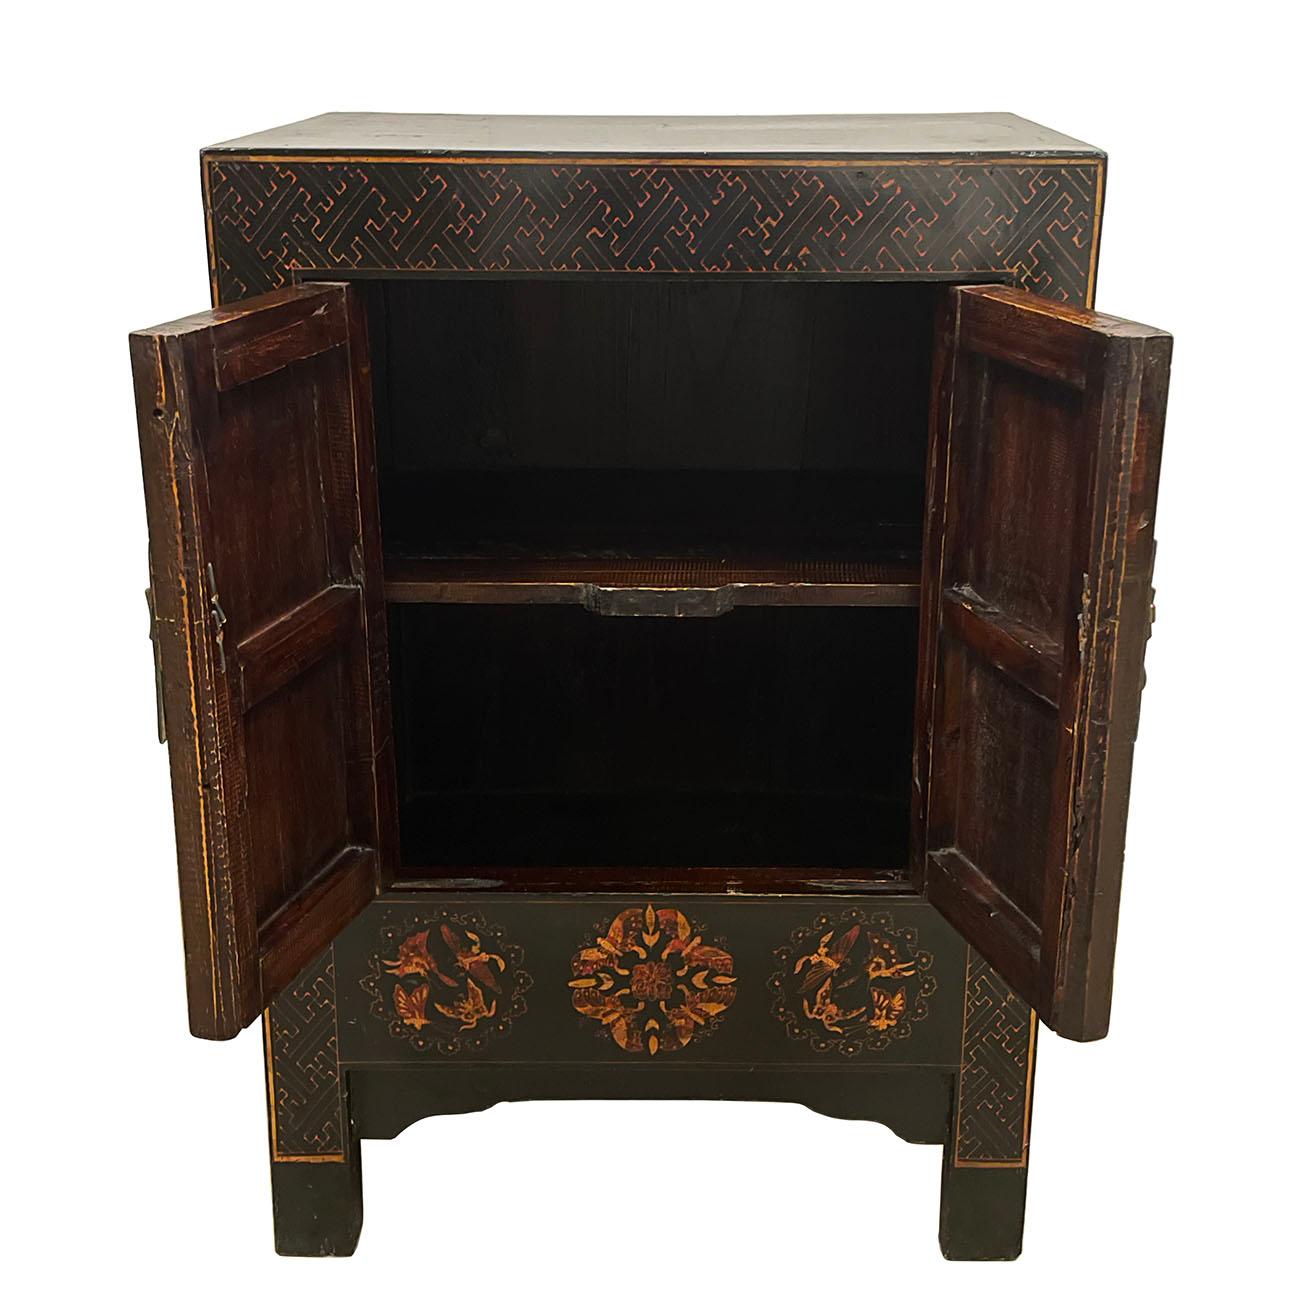 Vintage Chinese Painted Dragon Night Stand/End Table (Chinesischer Export) im Angebot